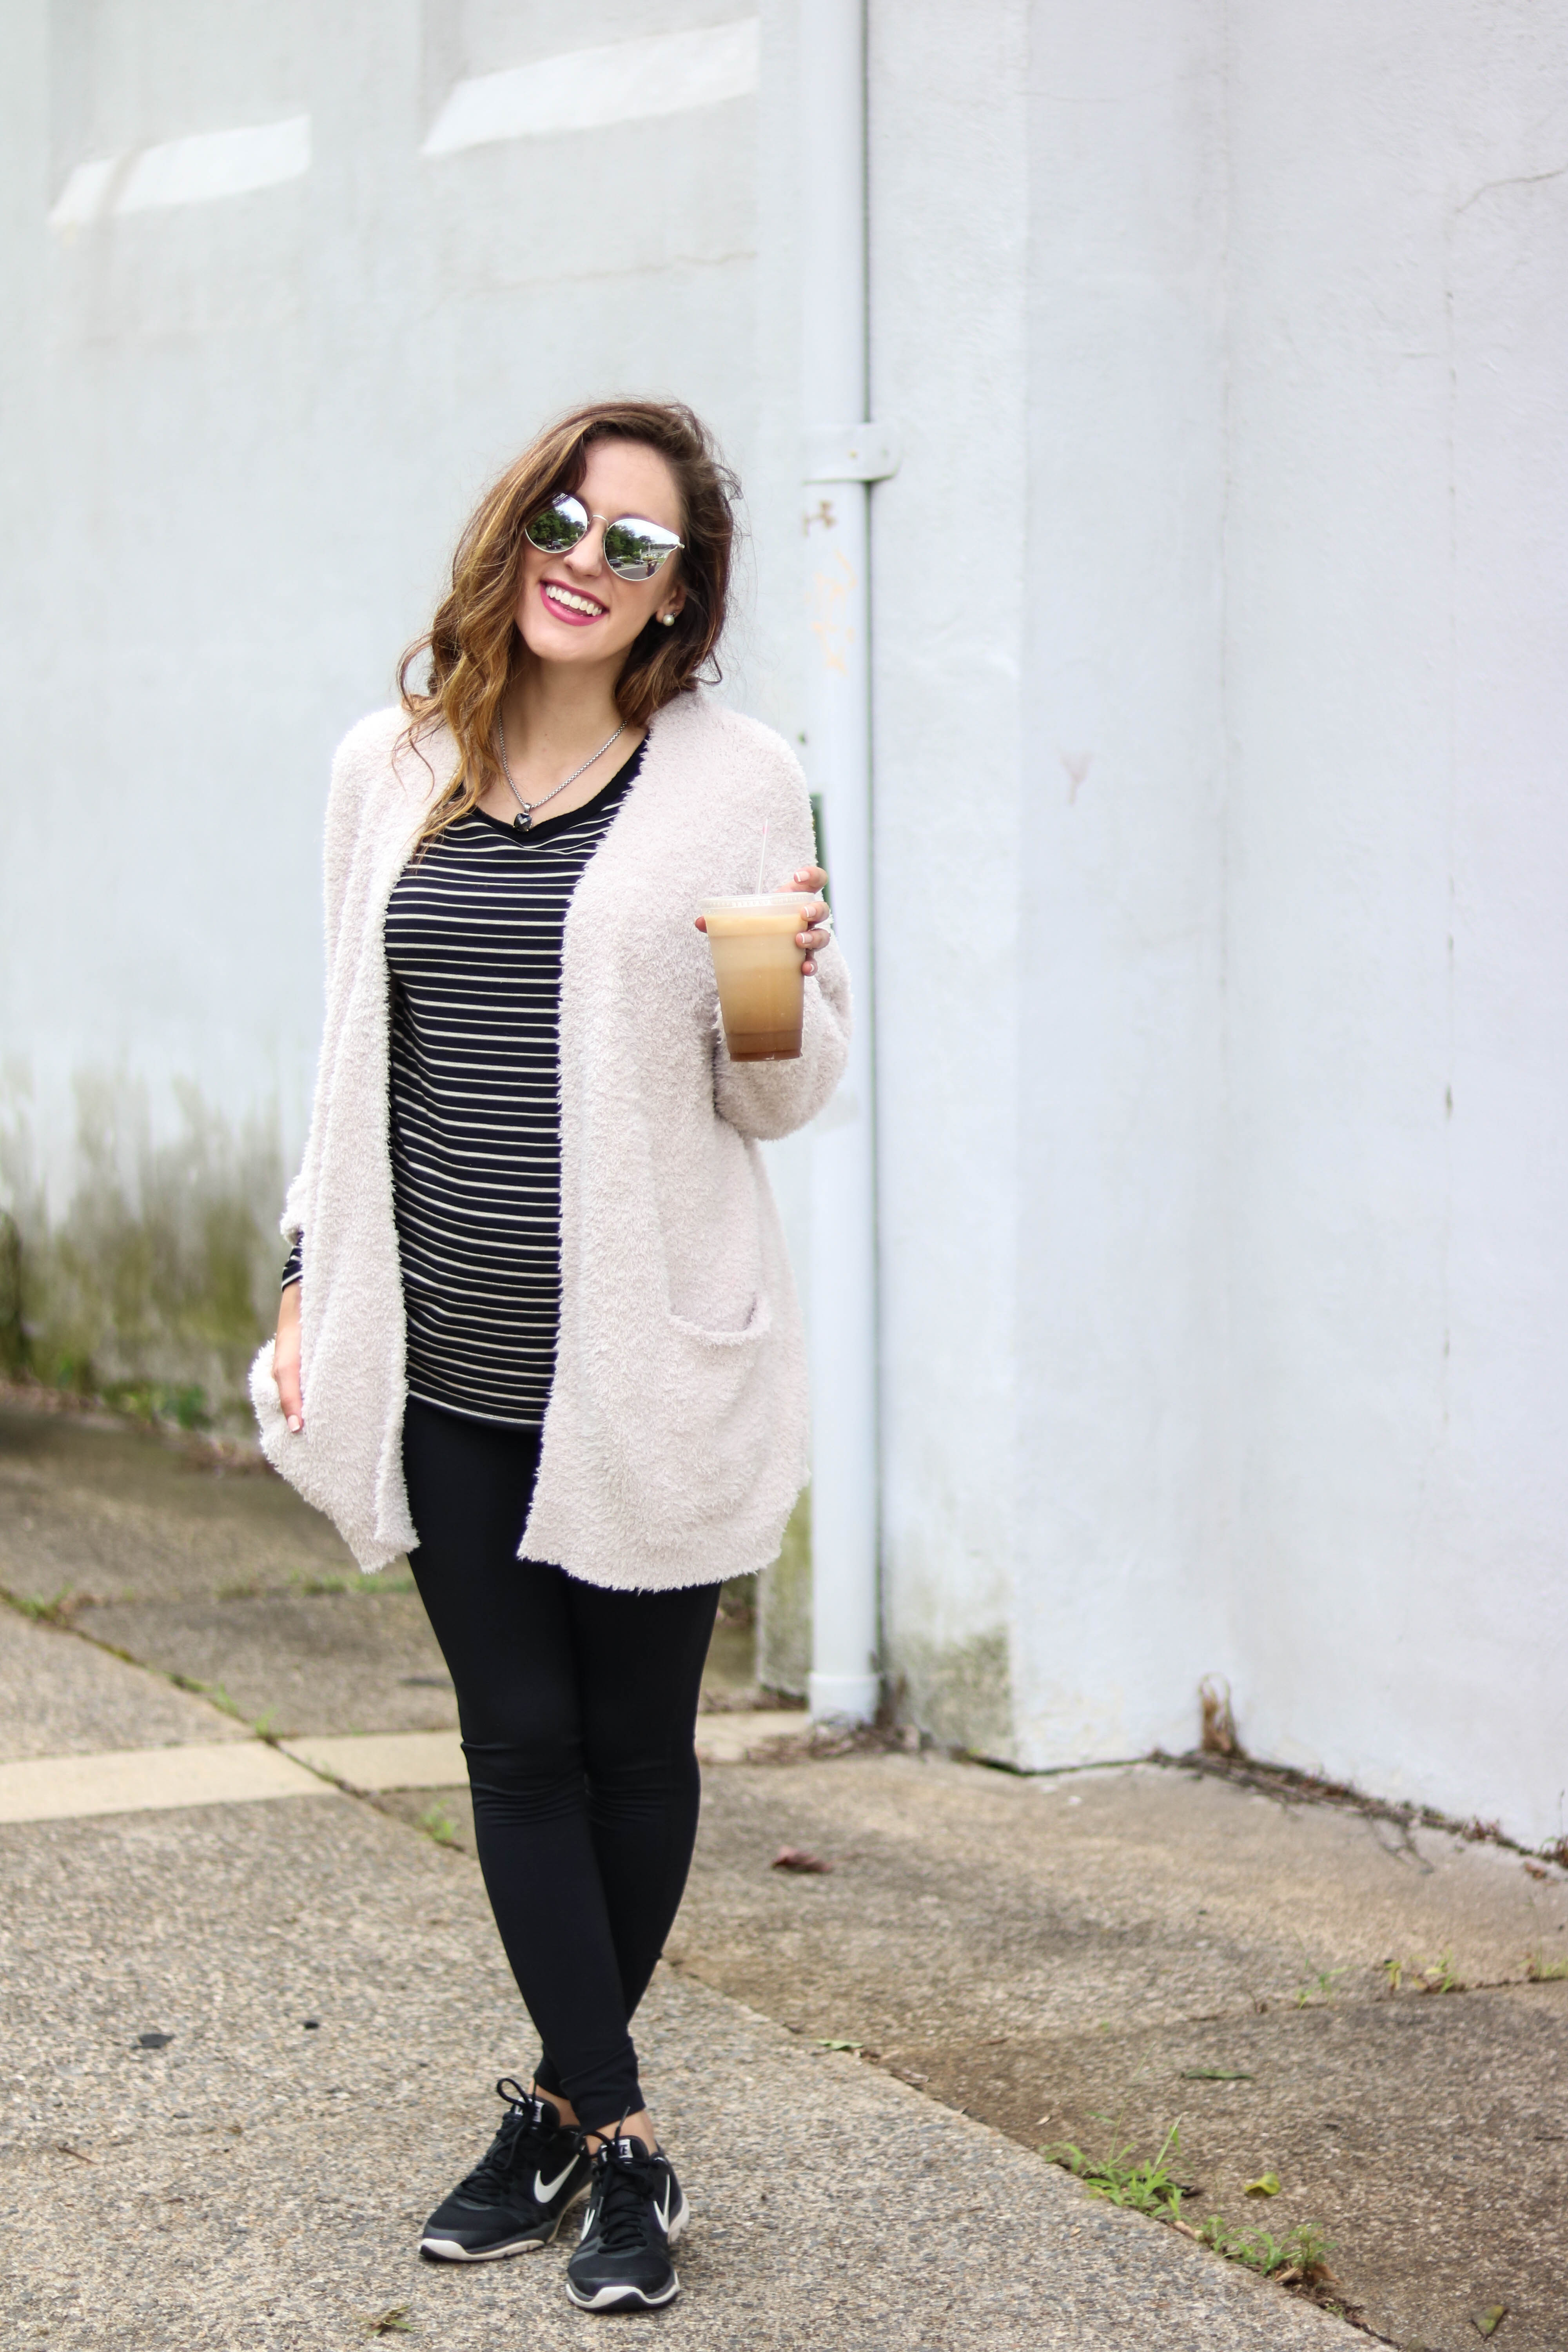 1 Thing, 3 Ways: Barefoot Dreams Cardigan. Philadelphia style blogger, Erica of Coming Up Roses, styles this on sale Barefoot Dreams Cardigan three different ways for transitioning to fall. Grab it while it's still on sale and in stock!